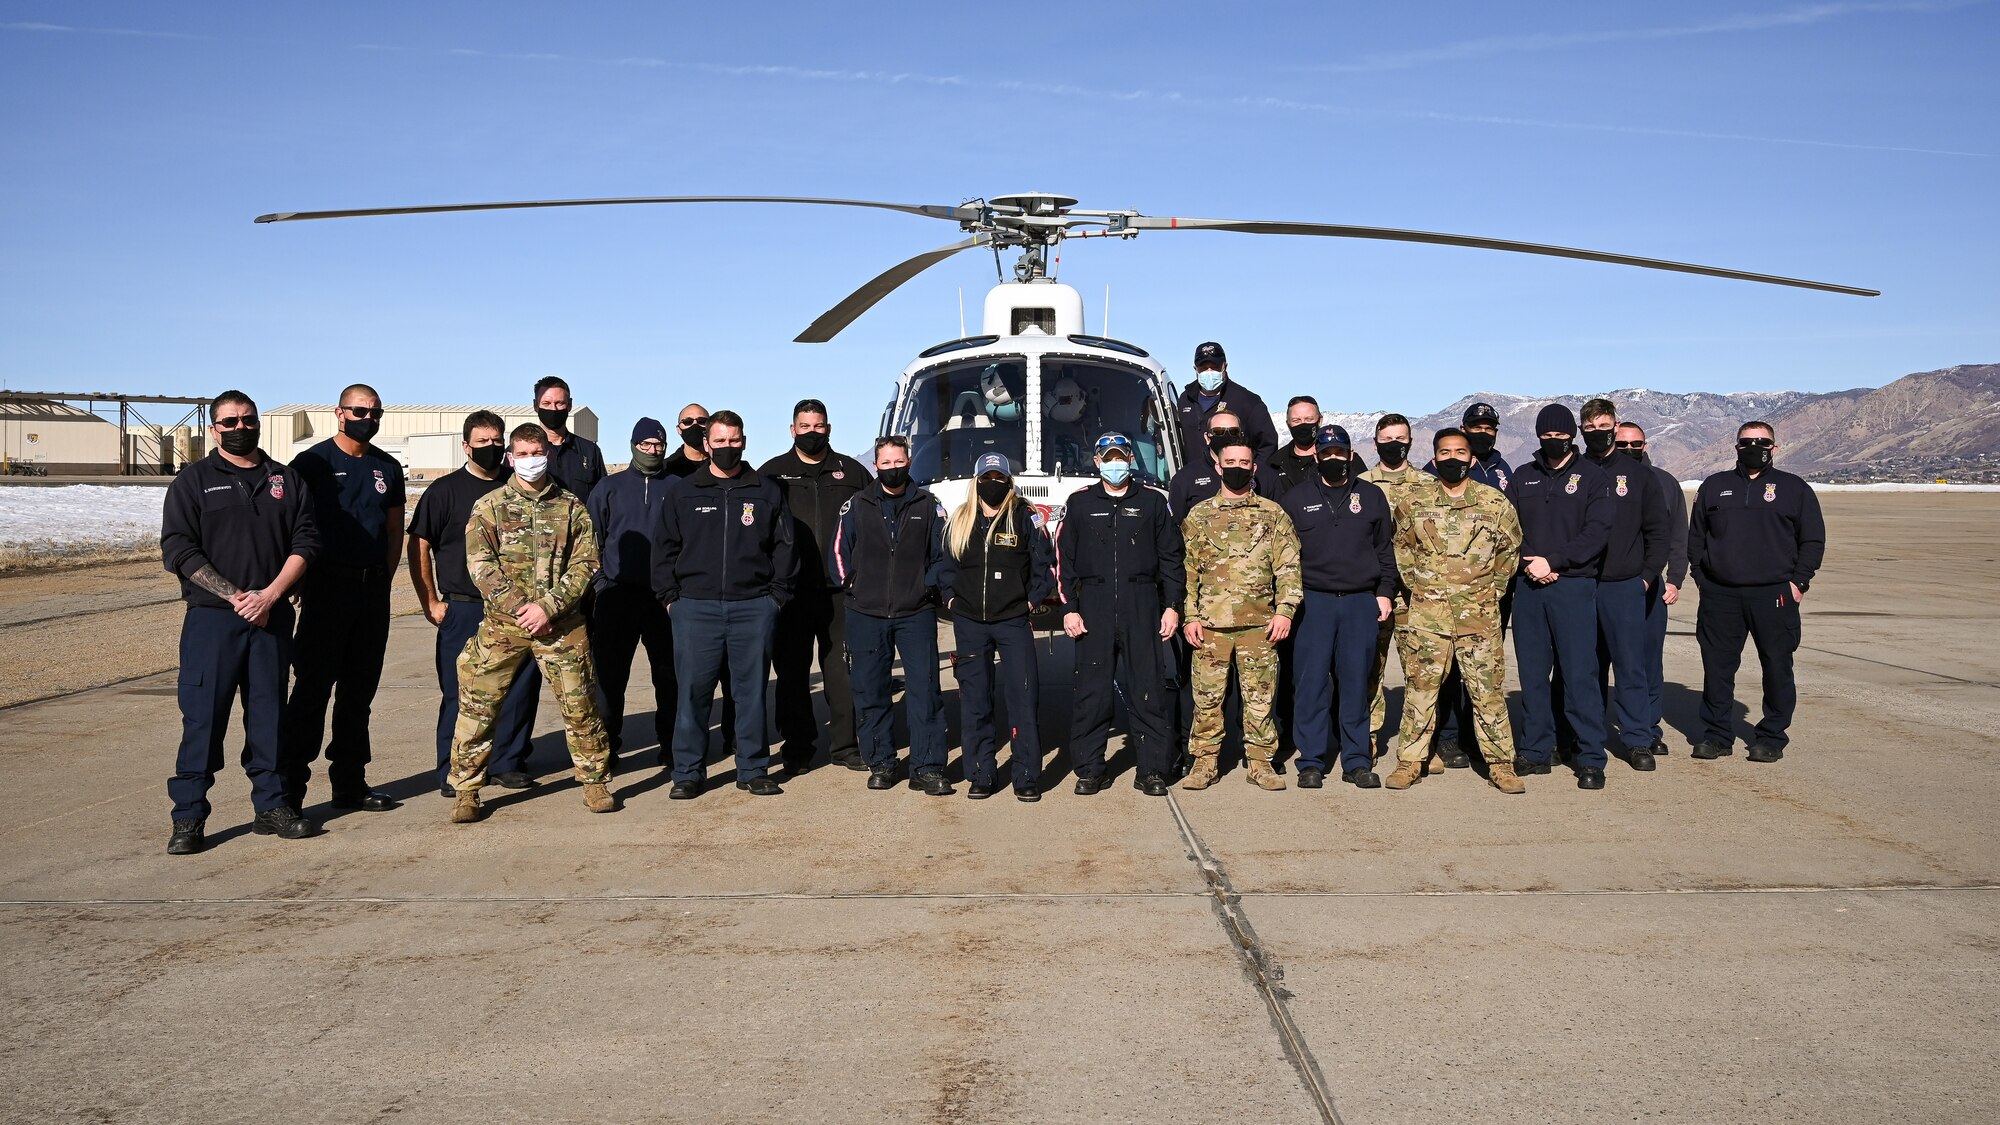 An AirLIfe Utah air ambulance crew and Hill firefighters pose for a group photo during an air ambulance training event at Hill Air Force Base, Utah, Jan. 14. 2021. Hill's first responders conduct the annual training to remain proficient on air ambulance operations. The Ogden AirLIfe Utah base is located at Ogden Regional Medical Center. (U.S. Air Force photo by R. Nial Bradshaw)